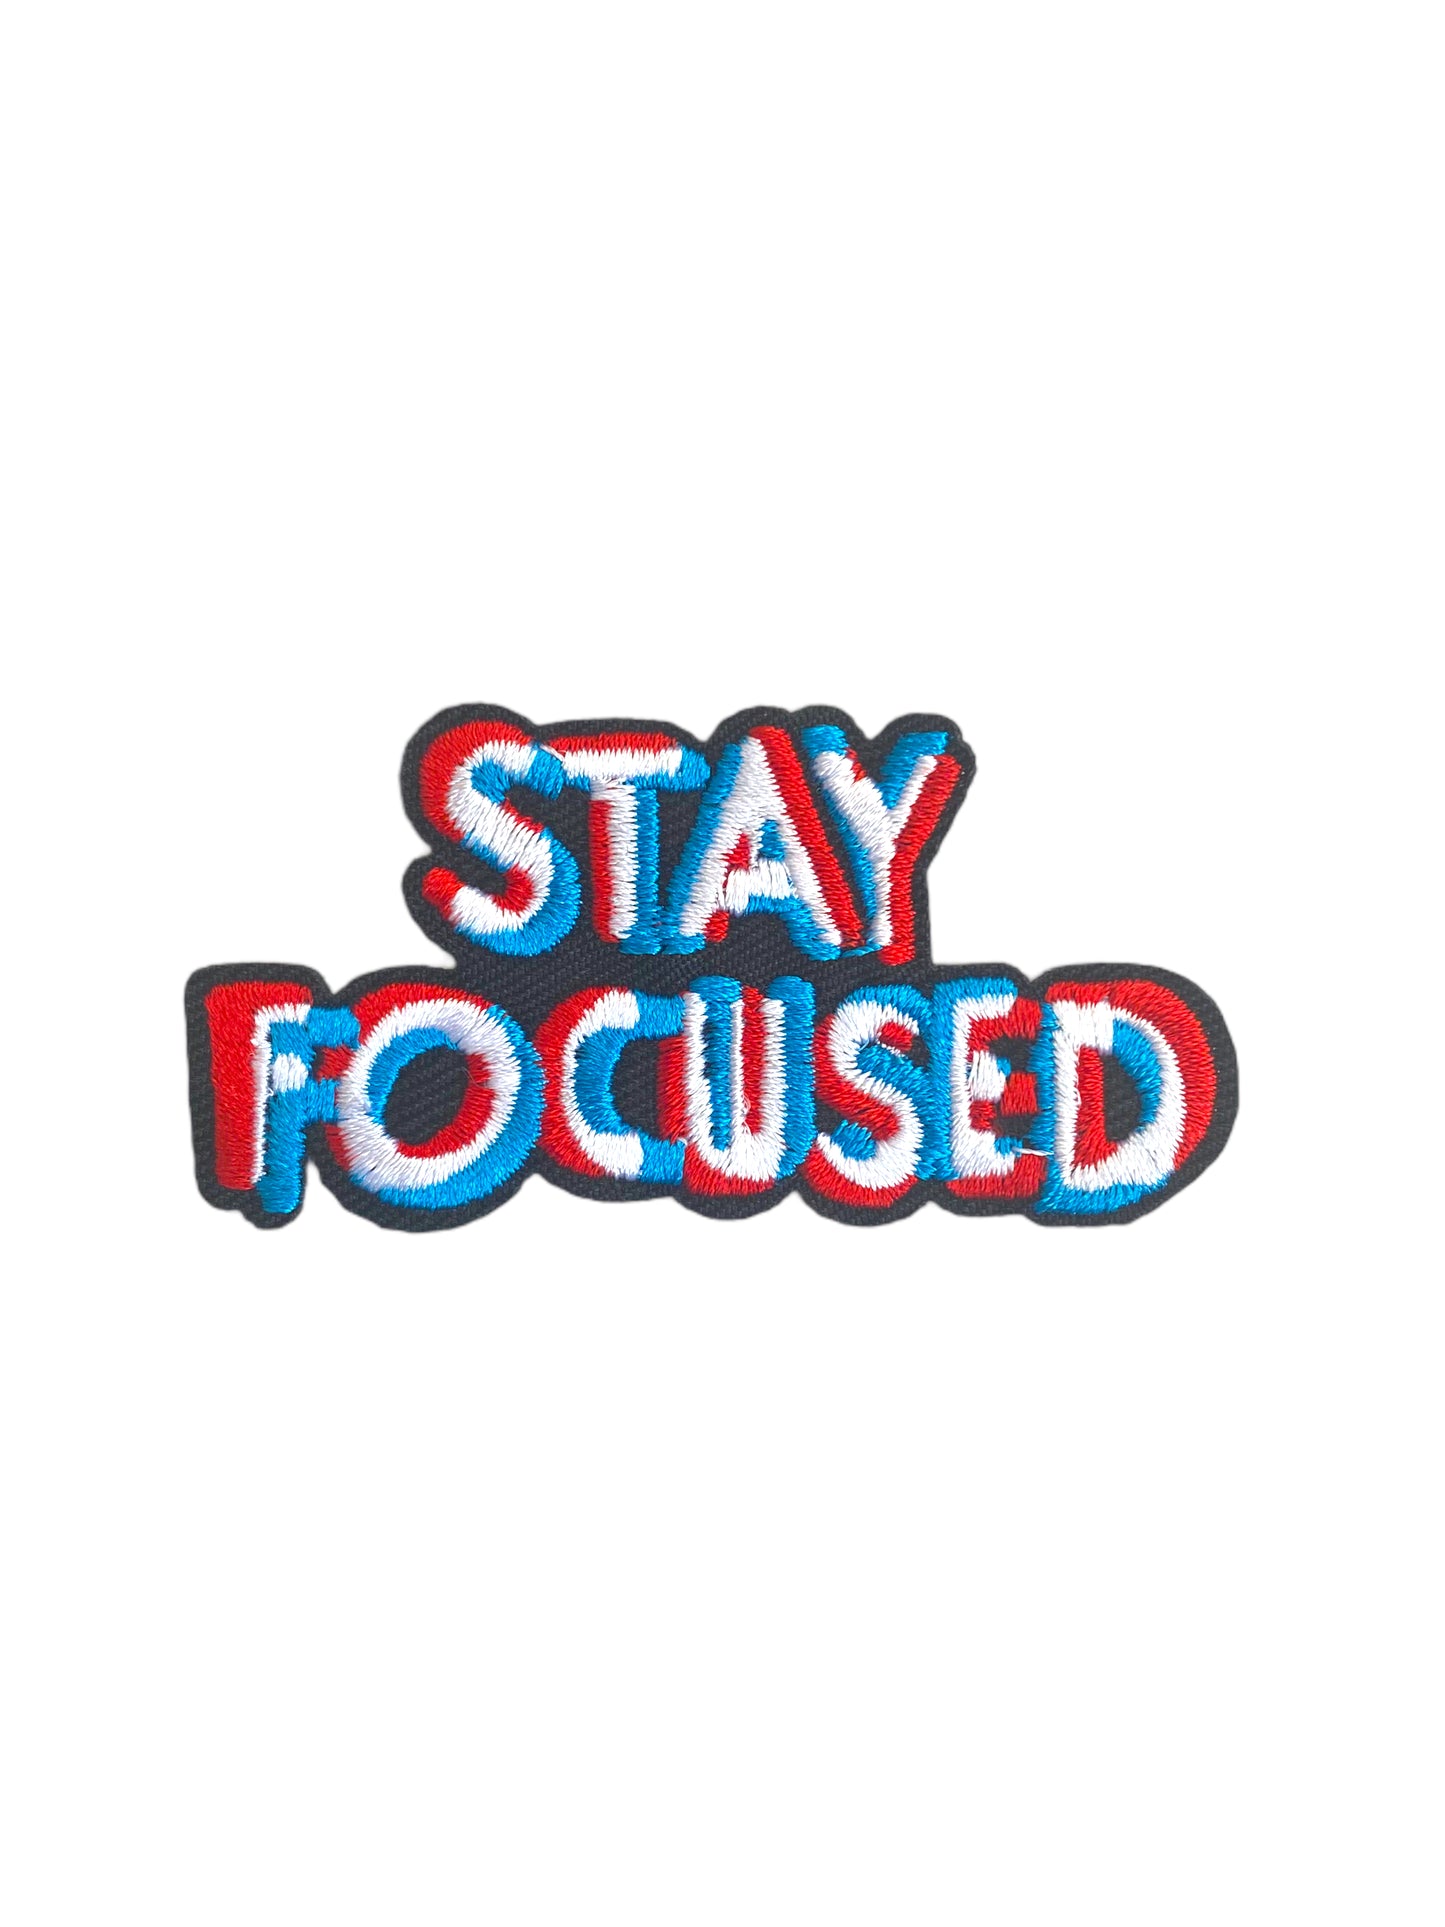 Stay Focused Punk Patch